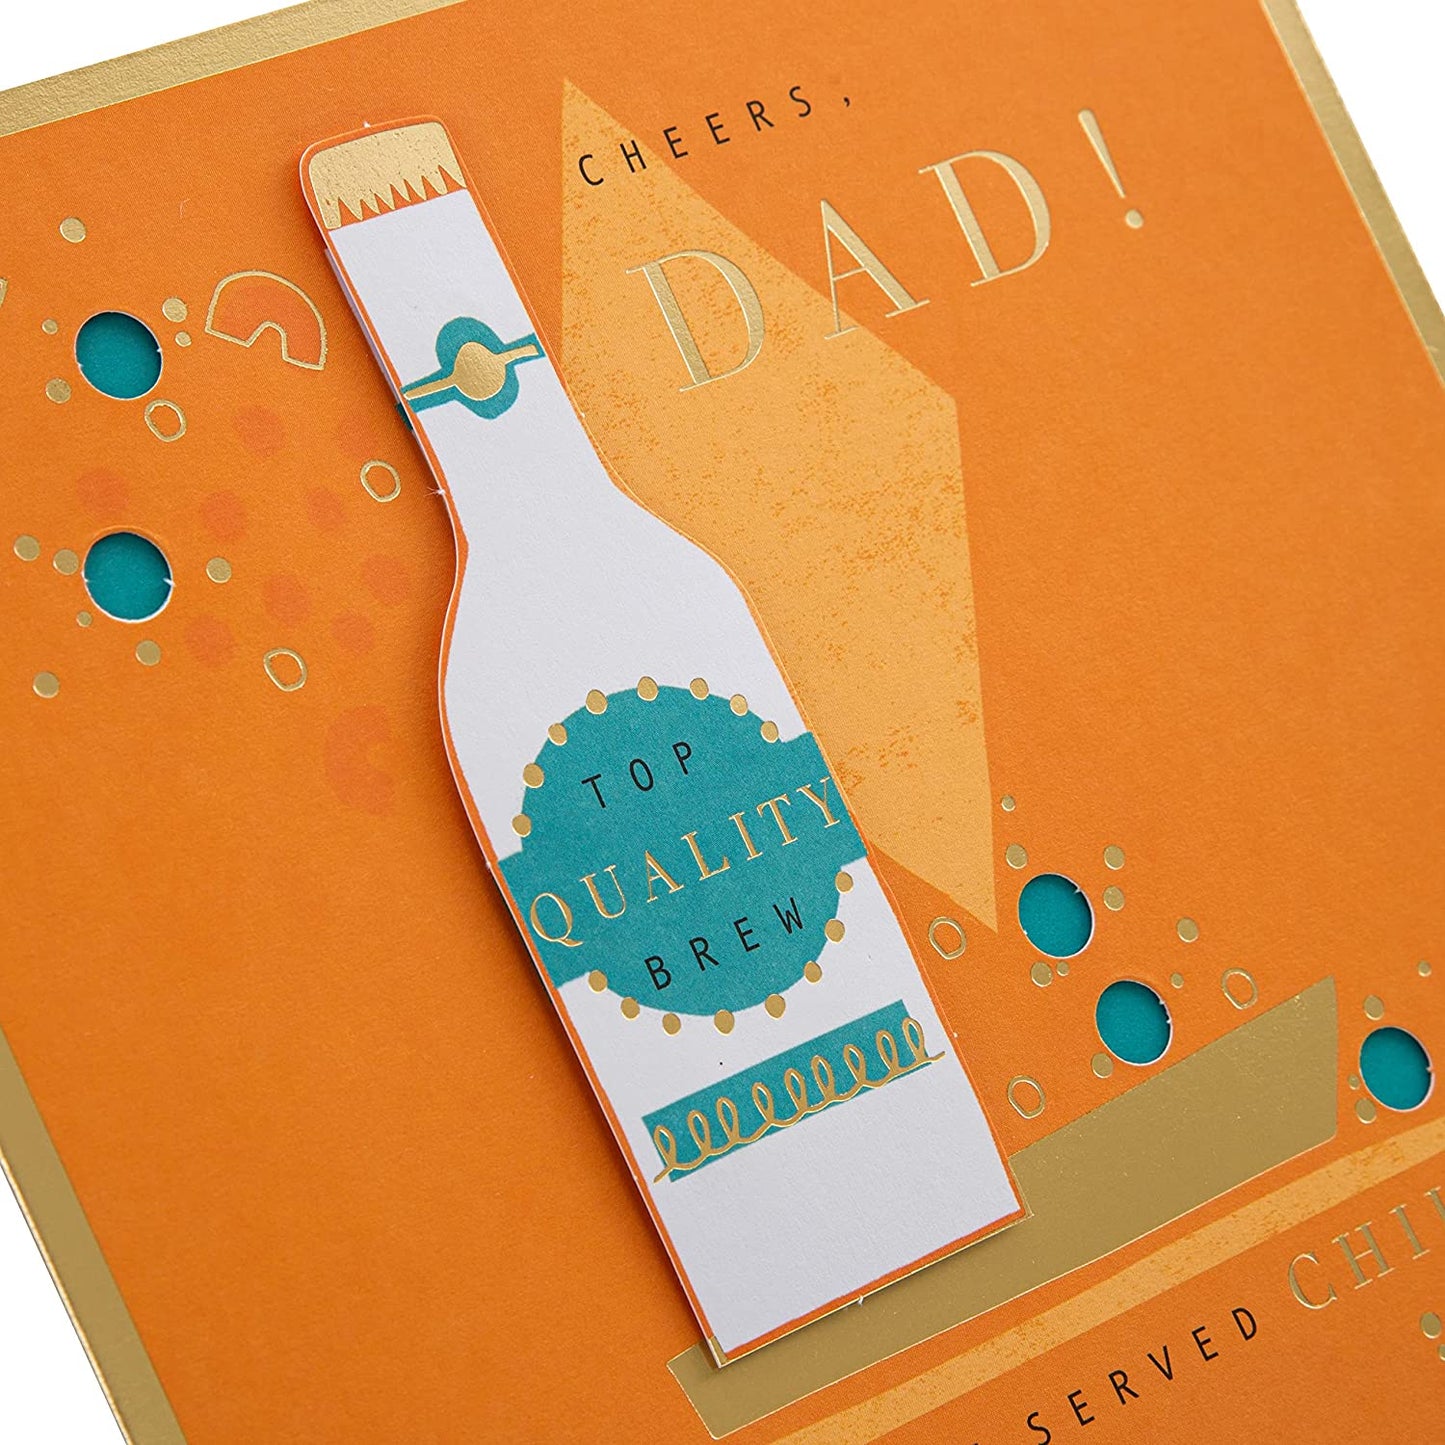 Classic Beer Bottle Design Large Birthday Card for Dad